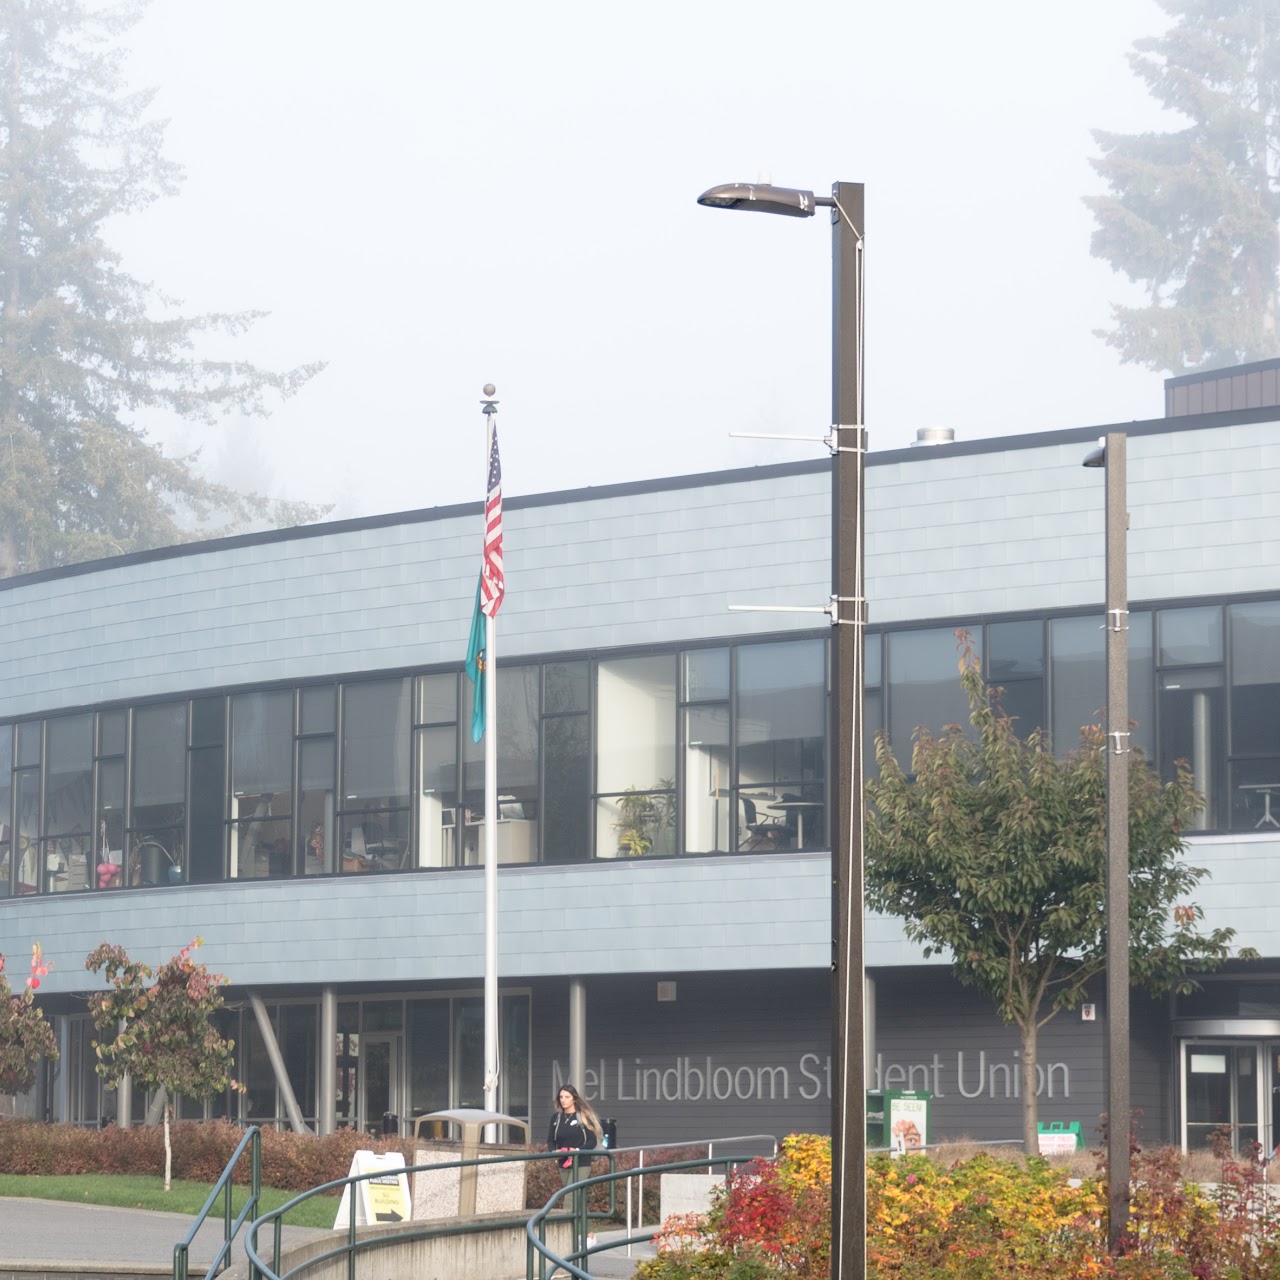 Student Union on a foggy day